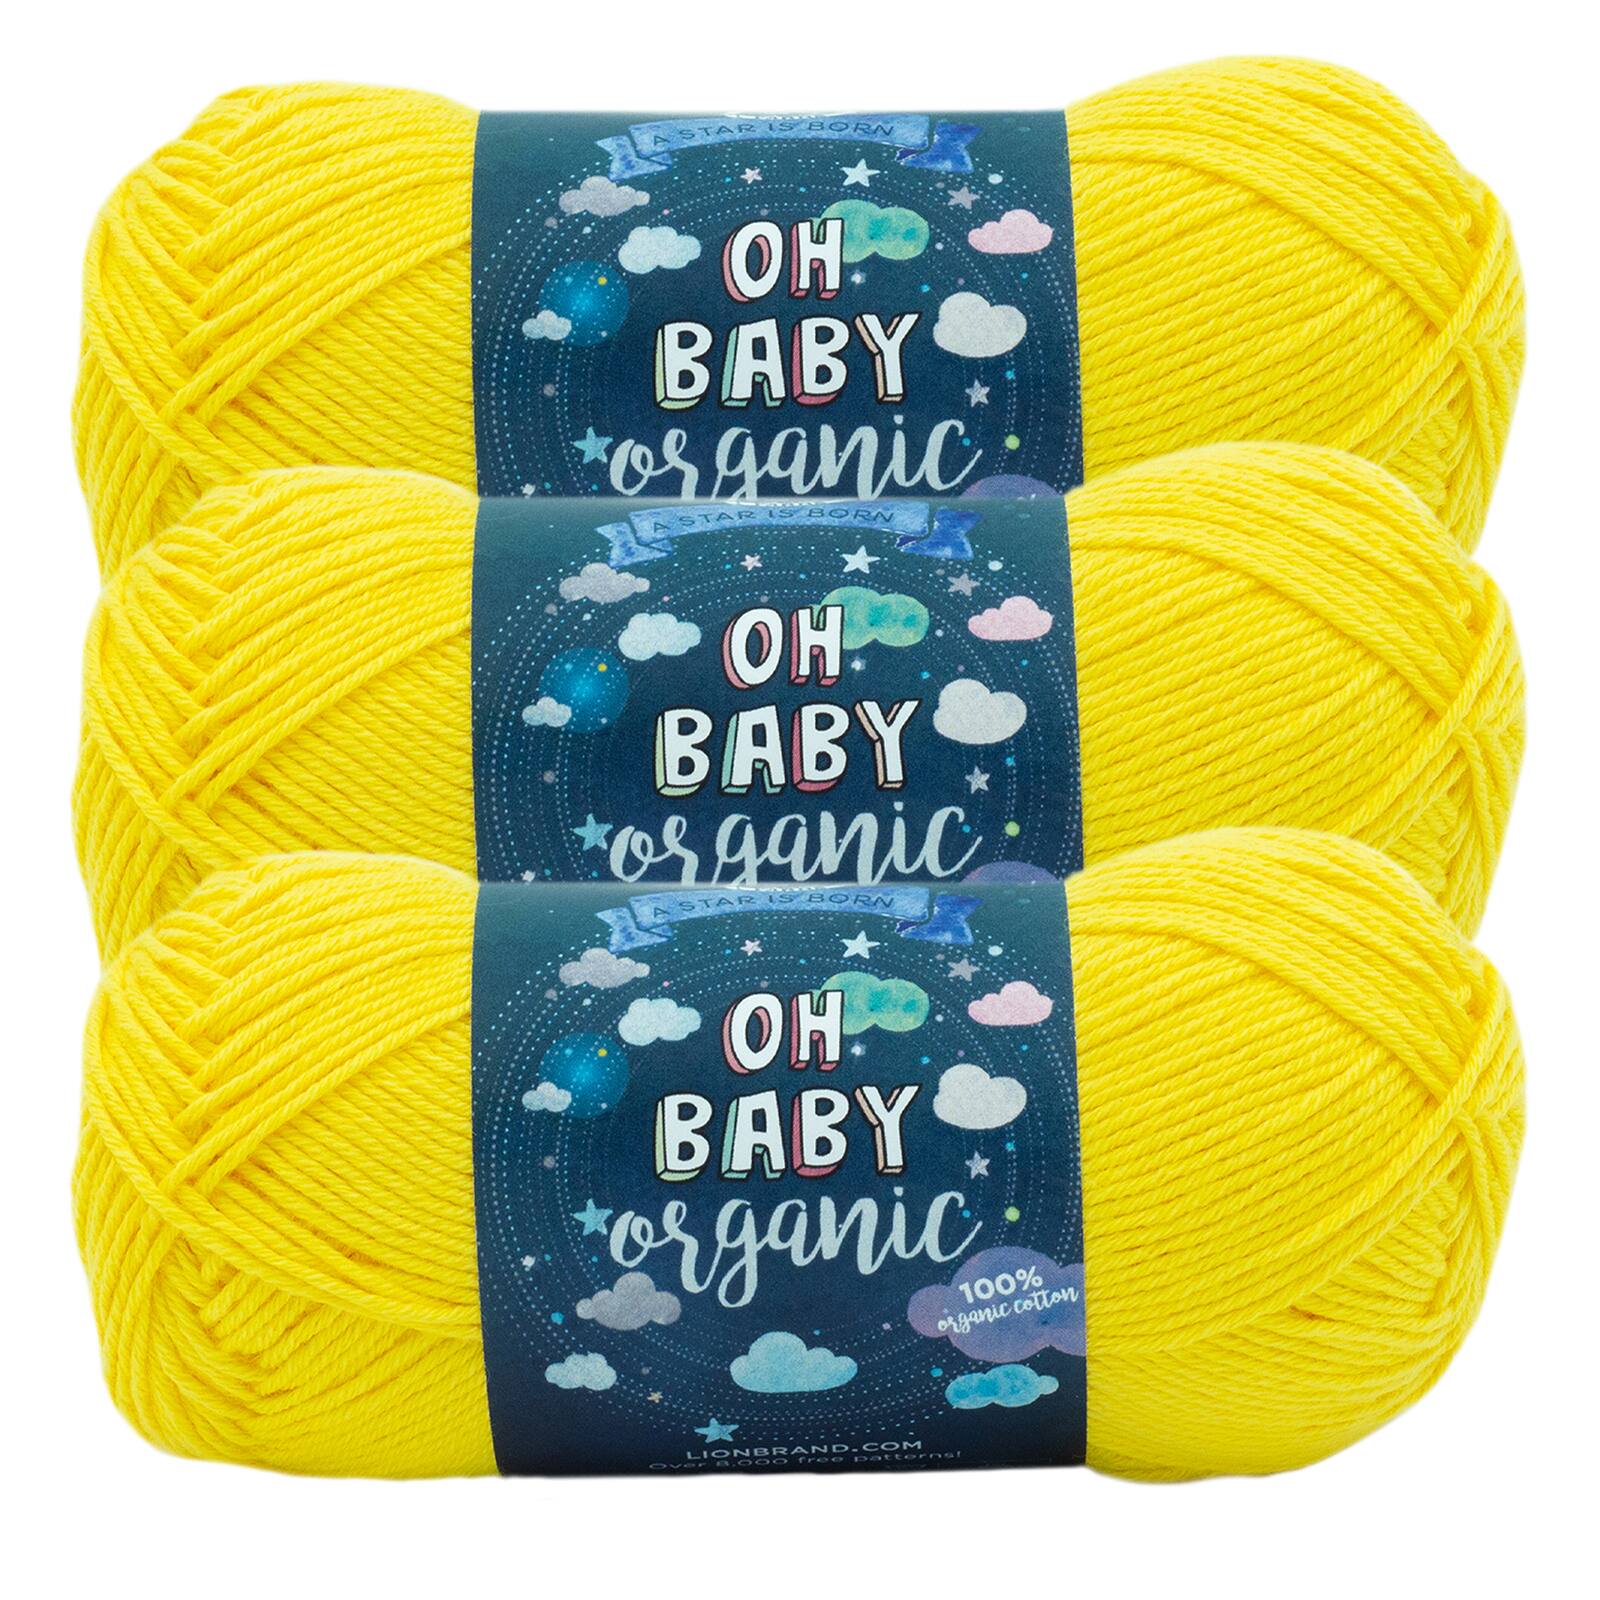 100% Organic Cotton Yarn from Lion Brand! - A Star is Born: Oh